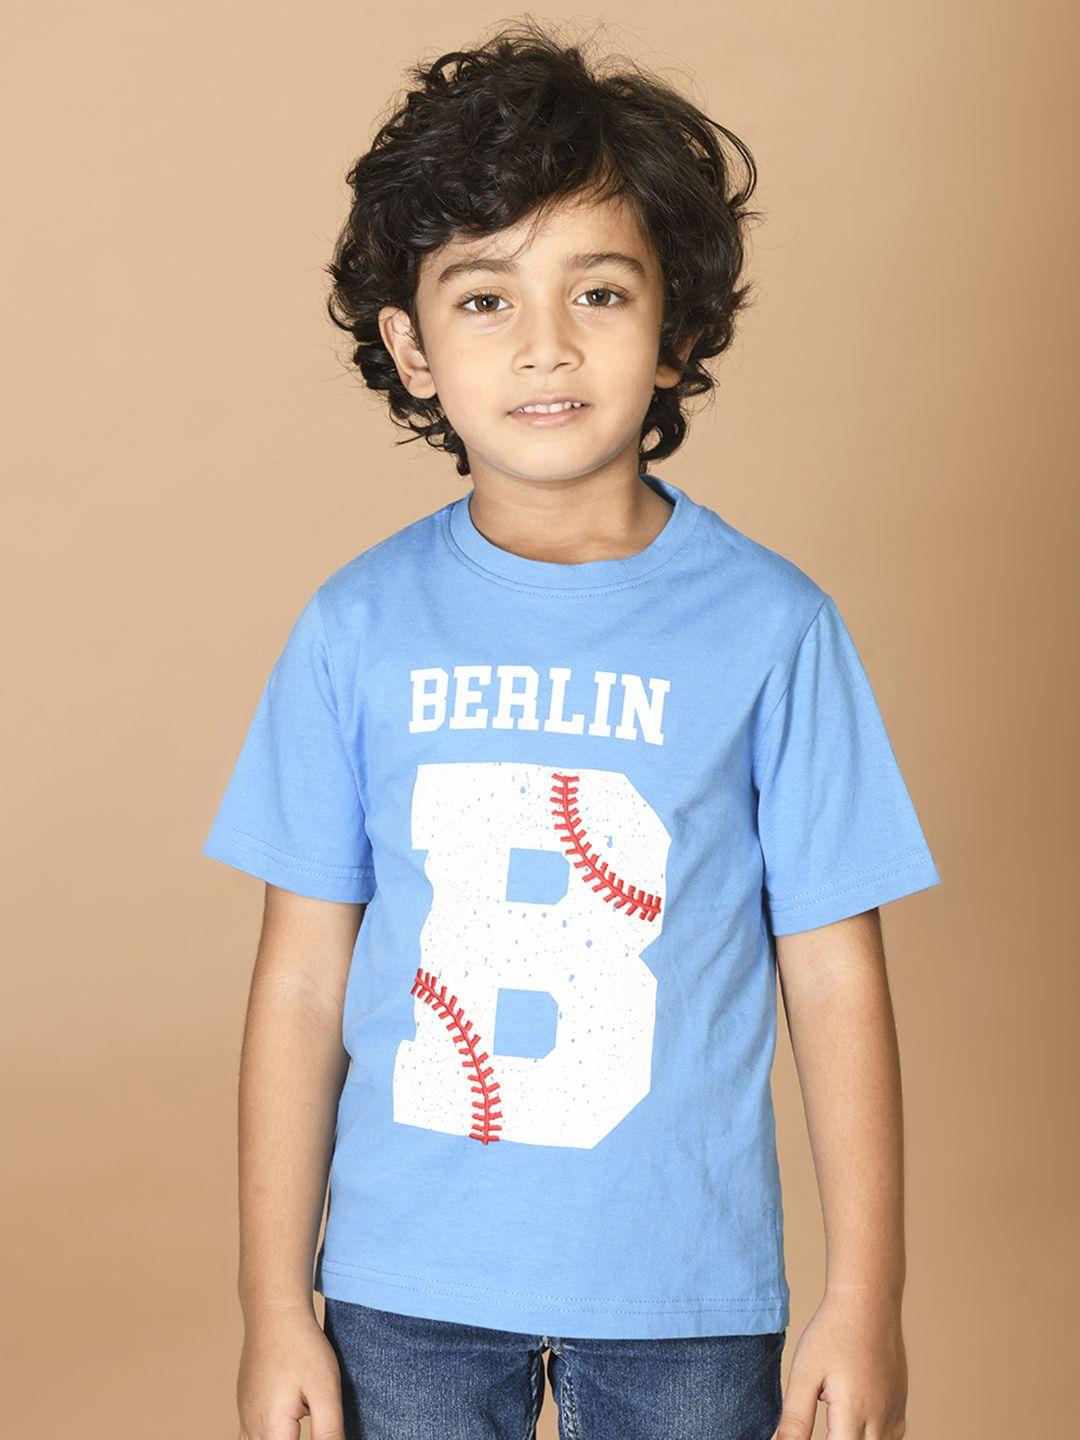 lilpicks boys turquoise blue typography printed t-shirt